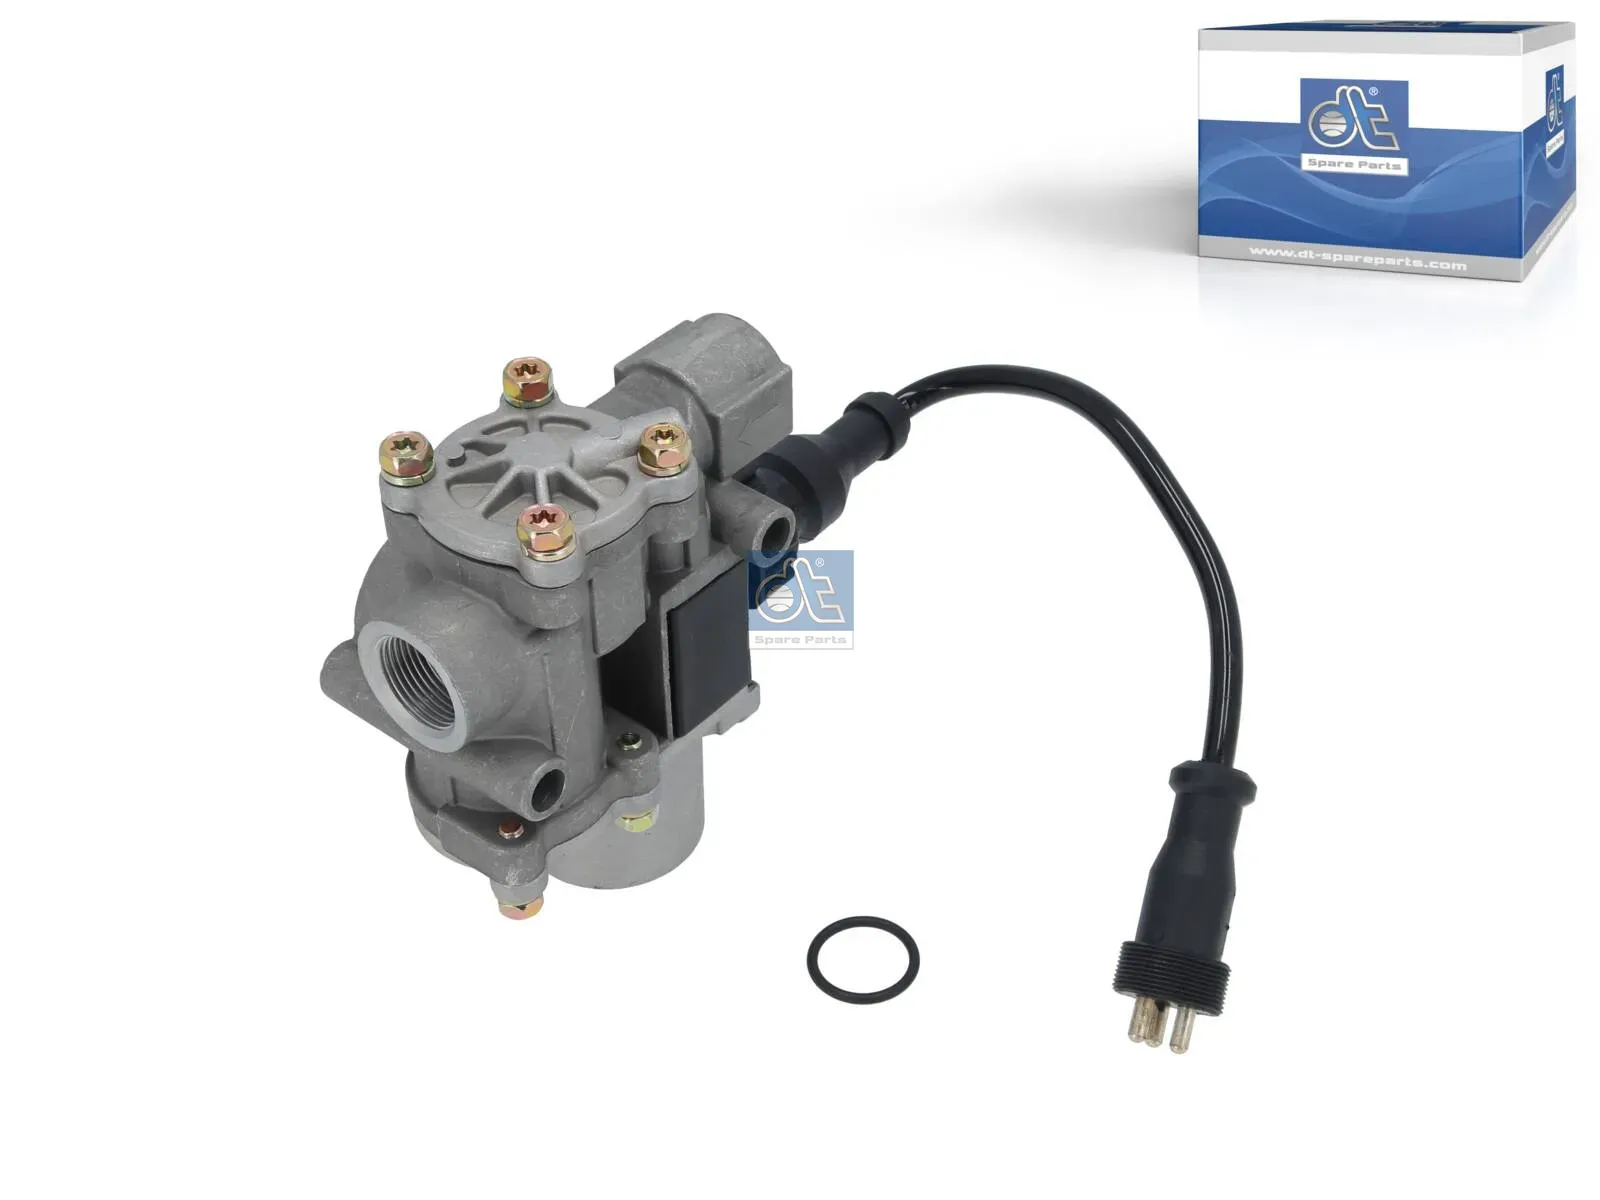 Solenoid valve, ABS, with adapter cable